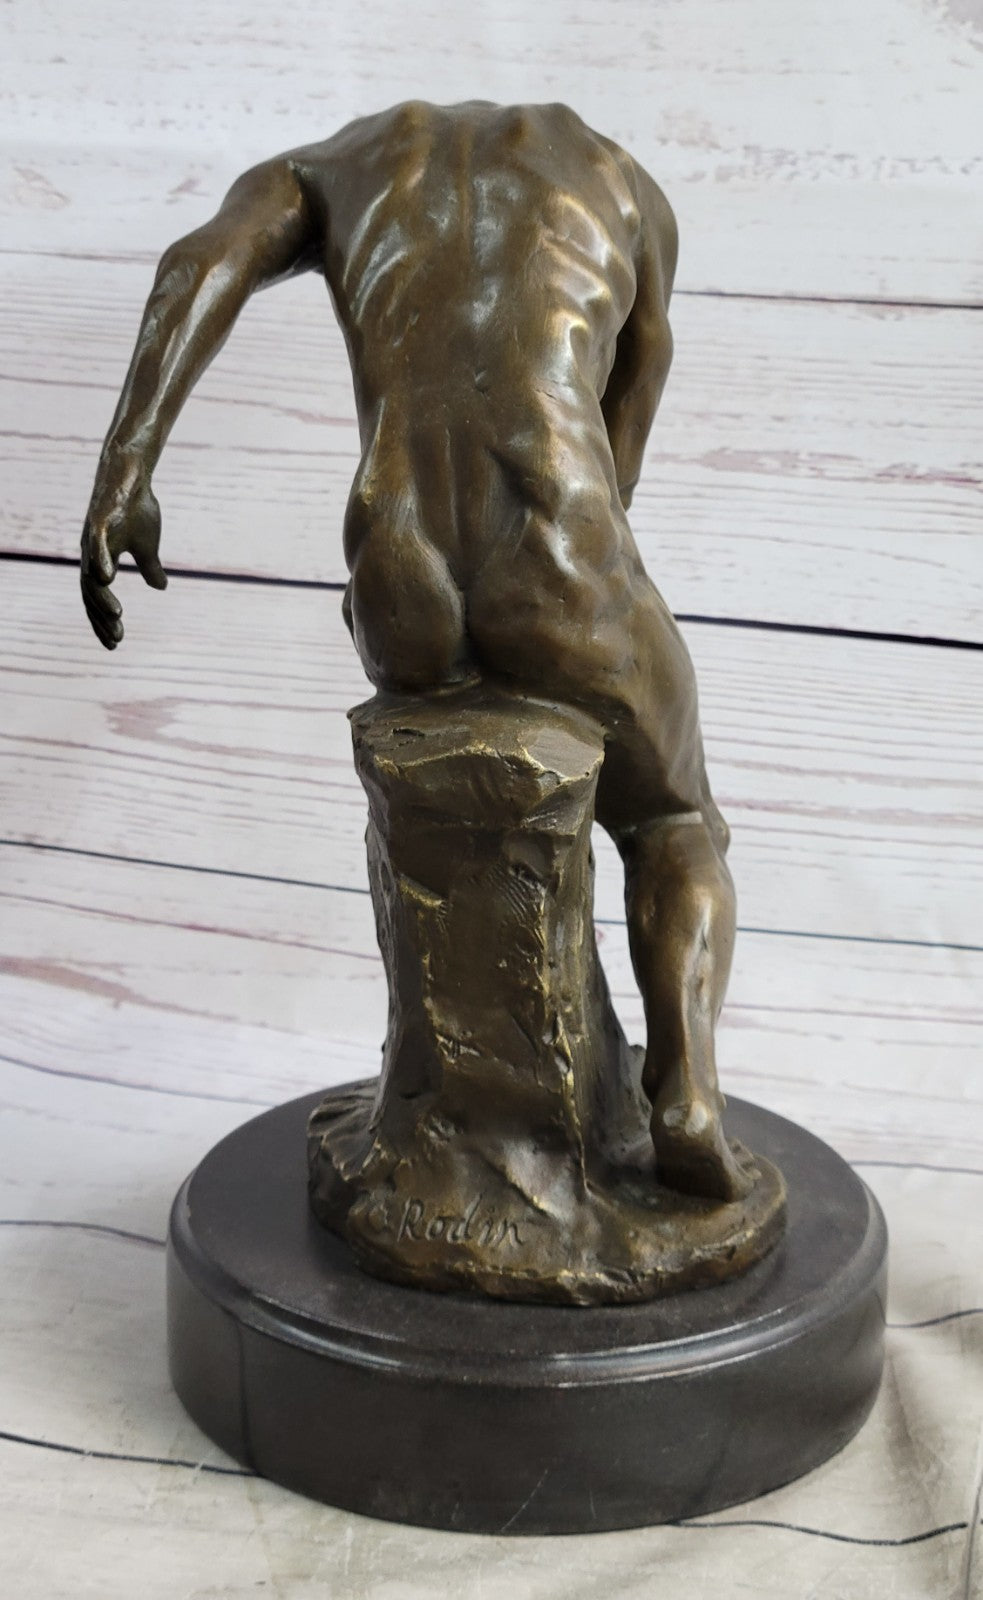 Handcrafted bronze sculpture SALE Male Erotic Sensual Nude Rodin Signed Large